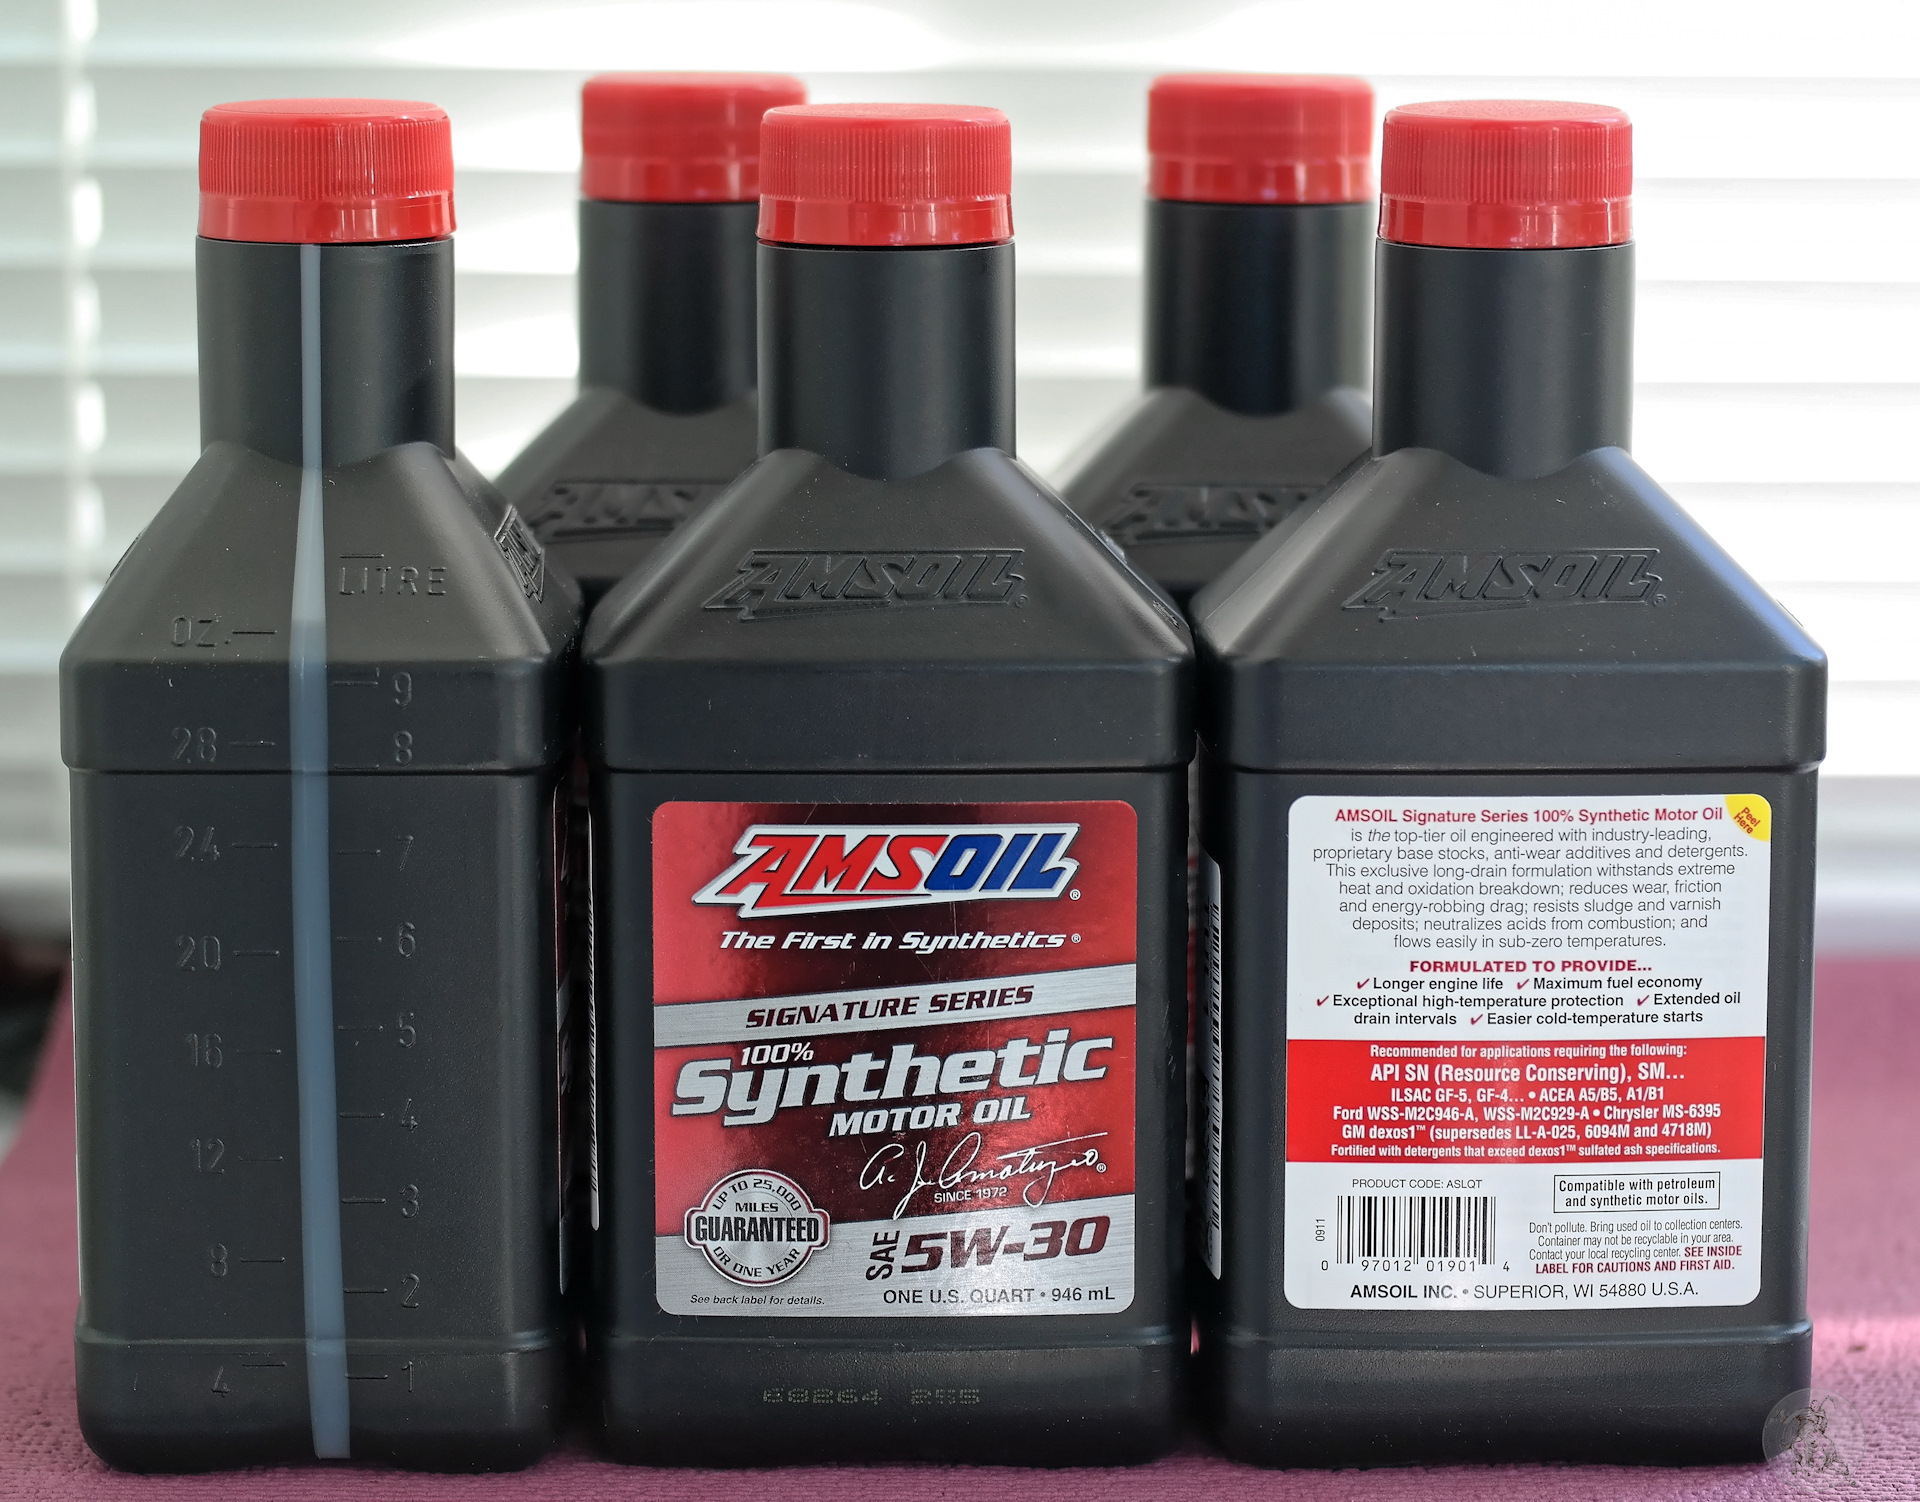 Amsoil signature series synthetic. AMSOIL SS 5w30. AMSOIL Signature Series 5w-30. Моторное масло AMSOIL 5w30. AMSOIL Signature Series Synthetic Motor Oil 5w-30.